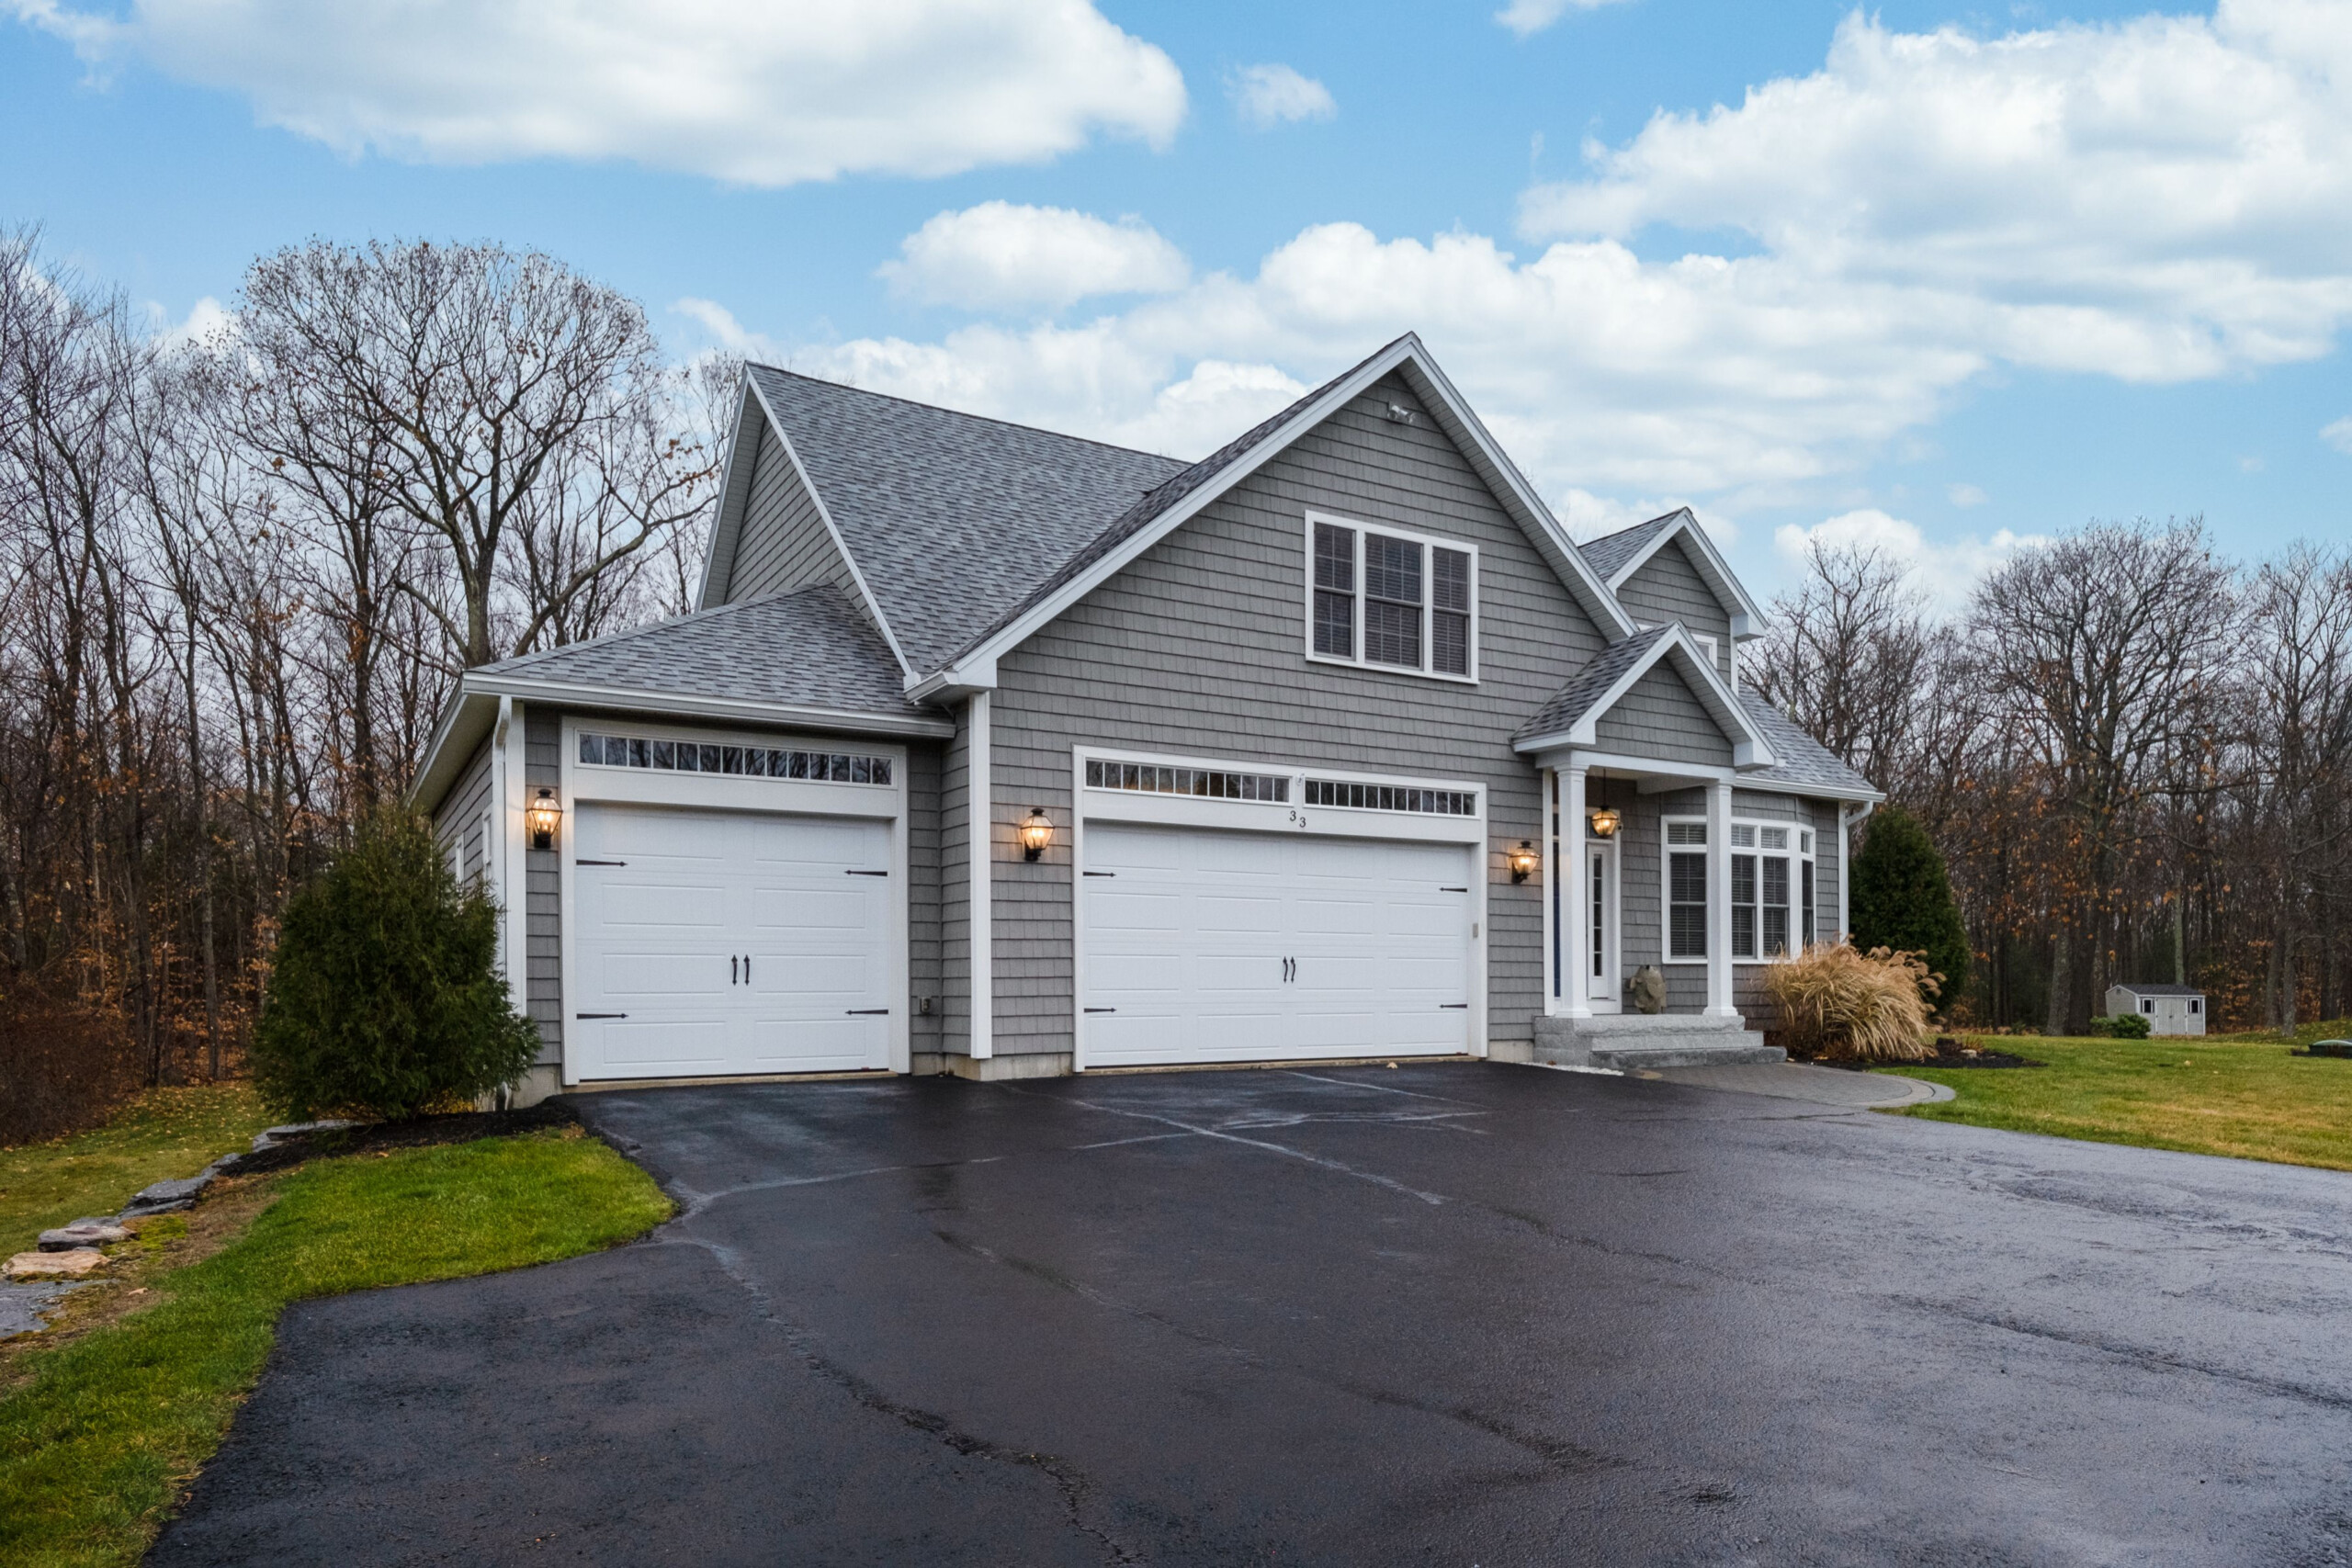 A gray-walled suburban house with asphalt driveway